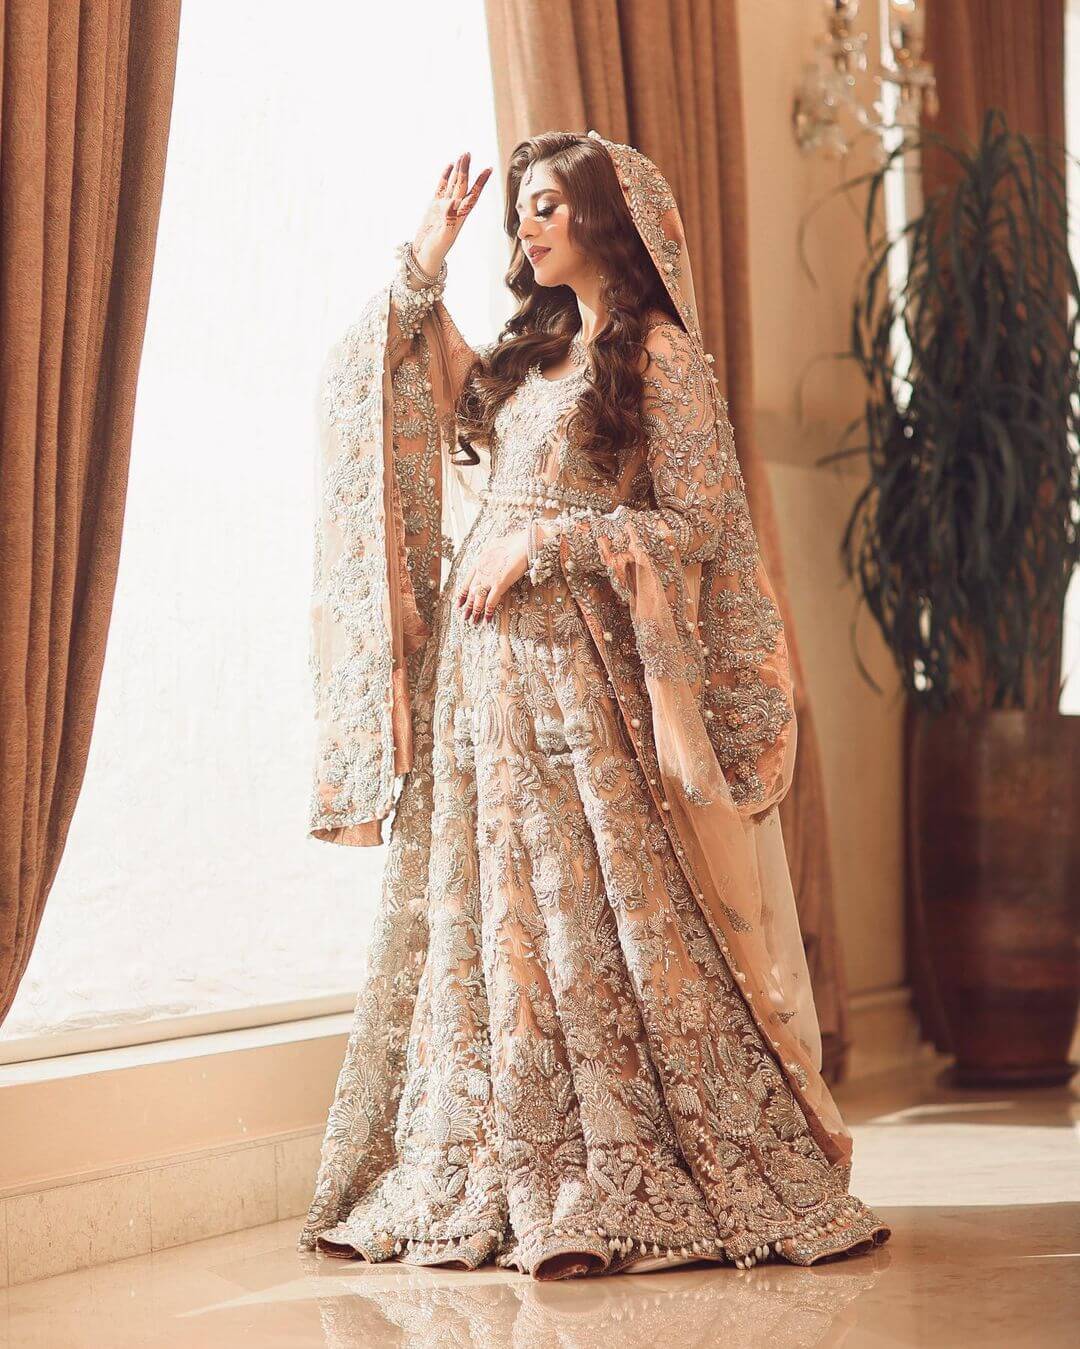 A Stunning Peach Anarkali Outfit for the Big Day: Lara Ibrahim's Beautiful Wedding Look